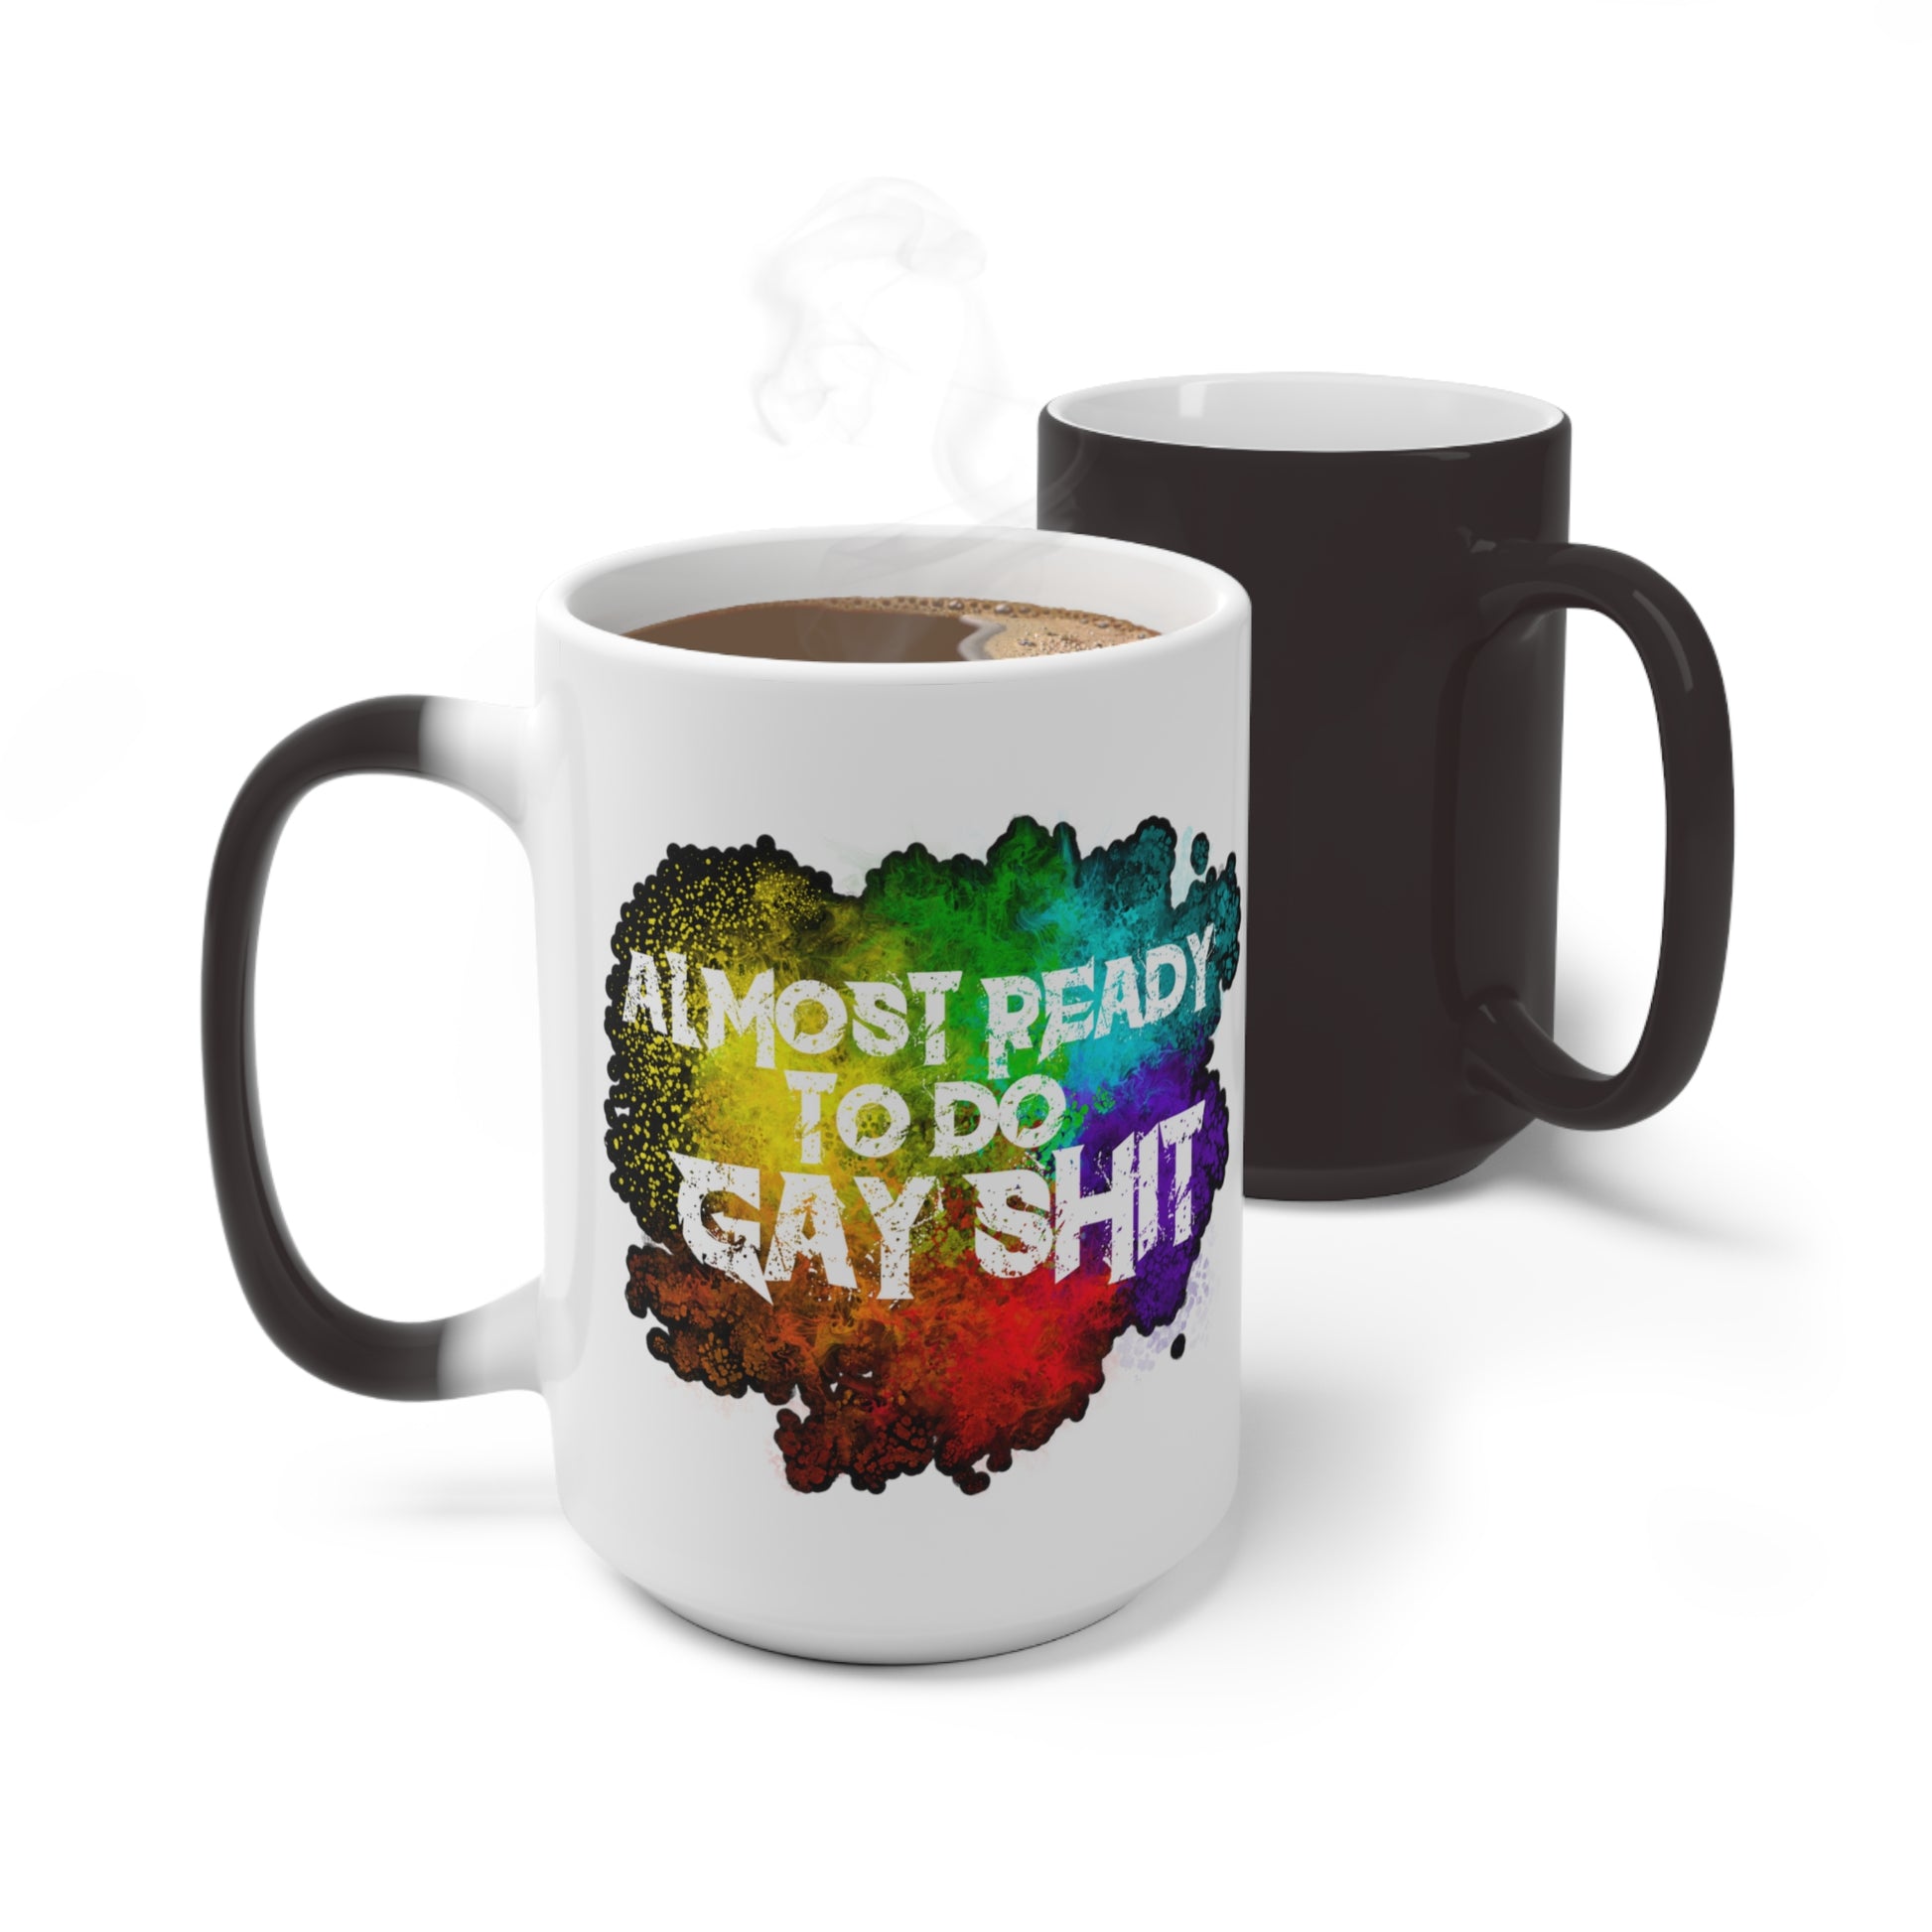 Buy the 11oz color-changing mug by Moody Booty Apparel with the text 'Almost Ready To Do Gay Shit.' This LGBTQ pride-themed coffee mug changes color when filled with hot liquid. Ideal for gay individuals, the LGBTQ community, and those celebrating pride and diversity.